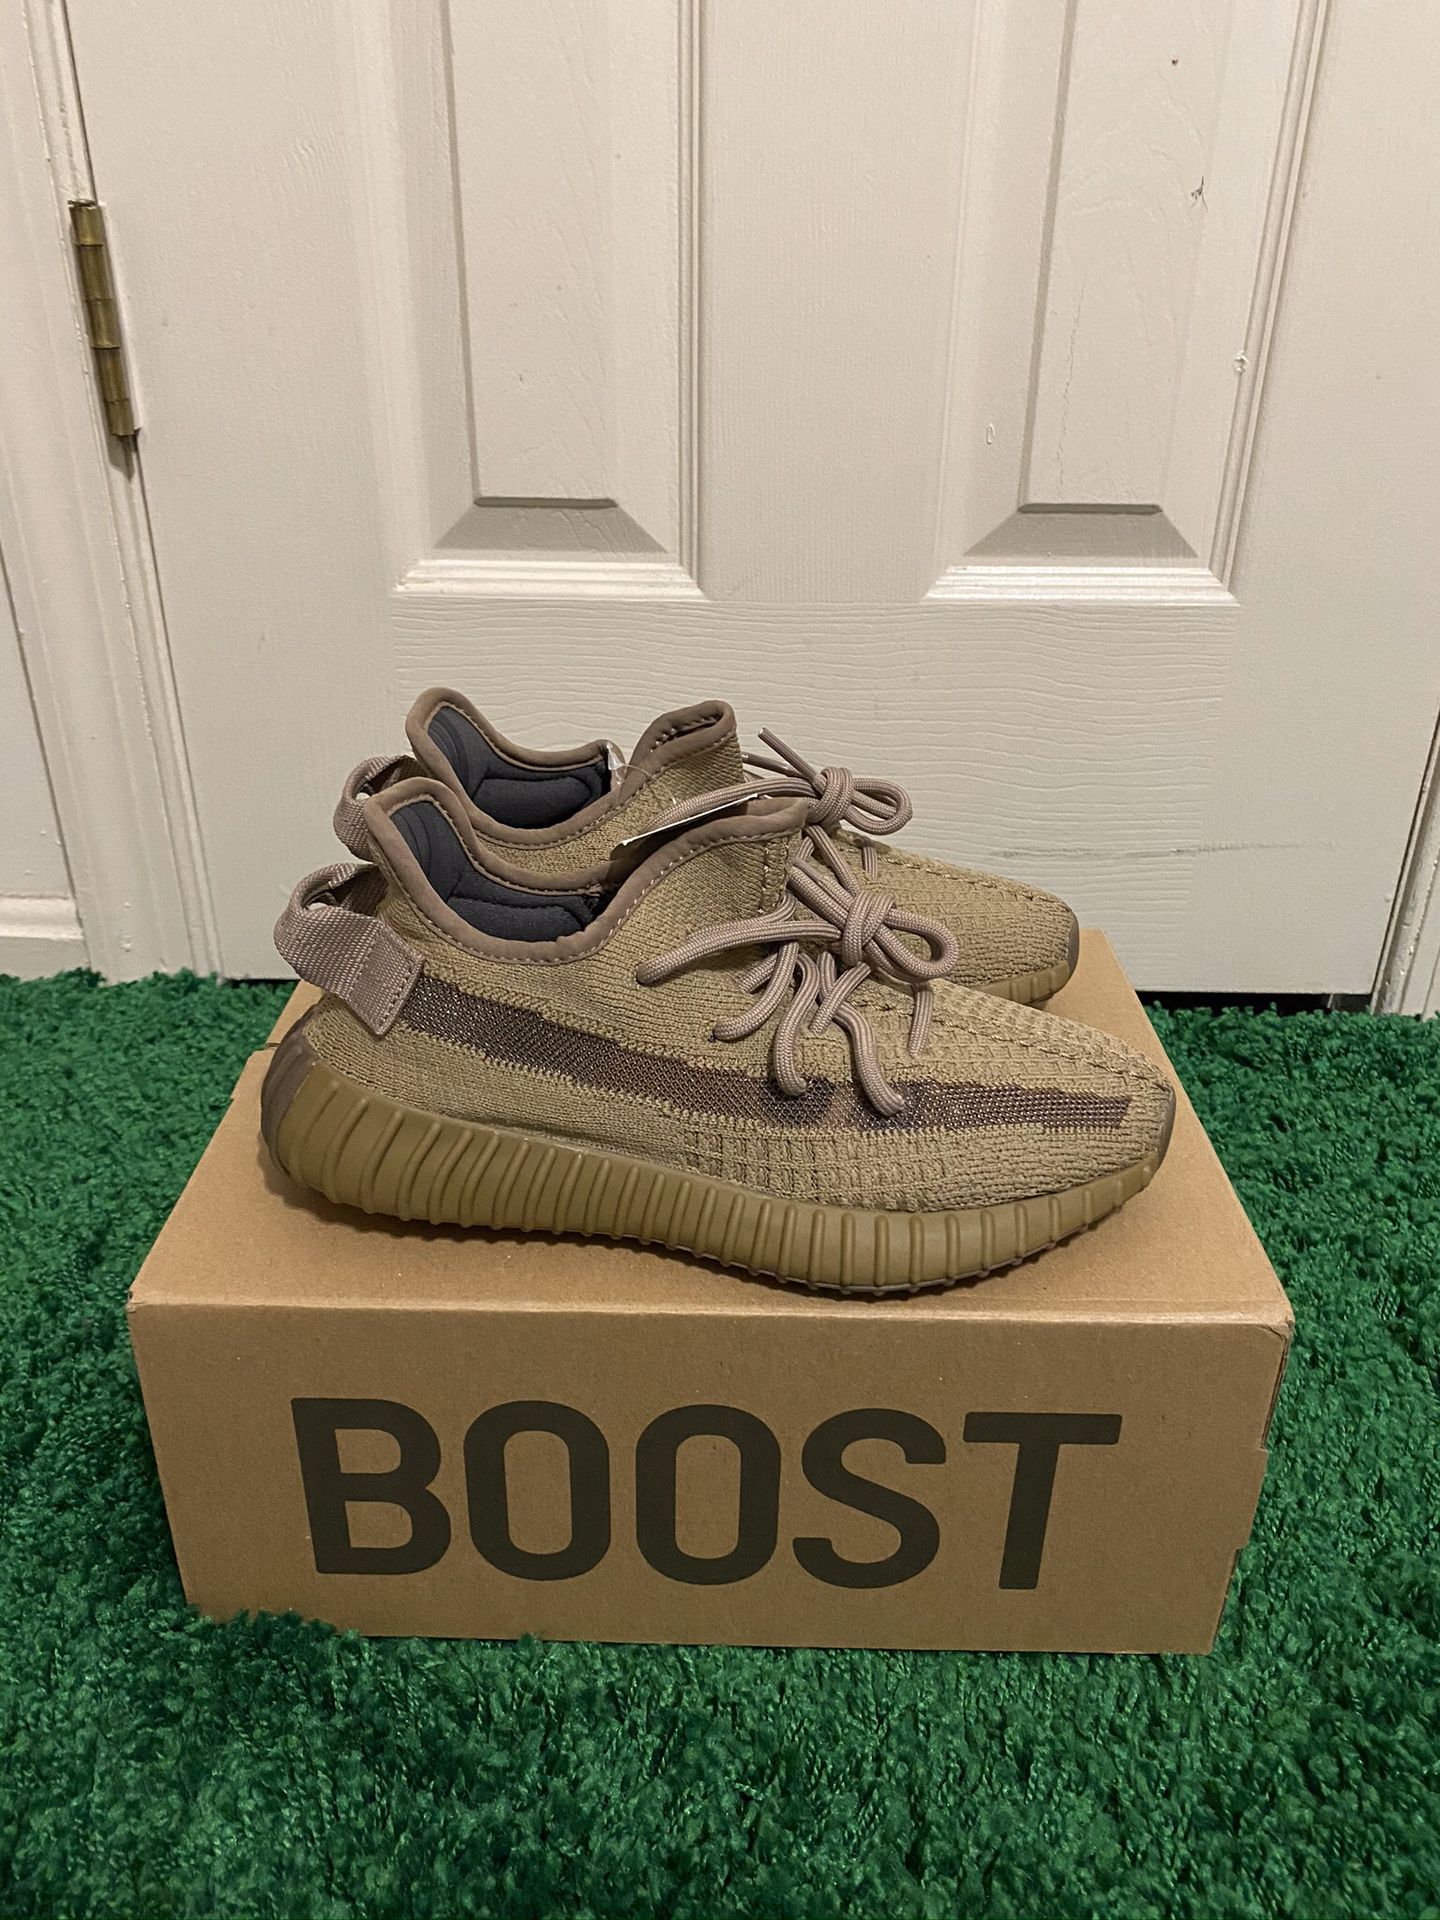 BRAND NEW ADIDAS YEEZY BOOST 350 EARTH SIZES 4 4.5 5